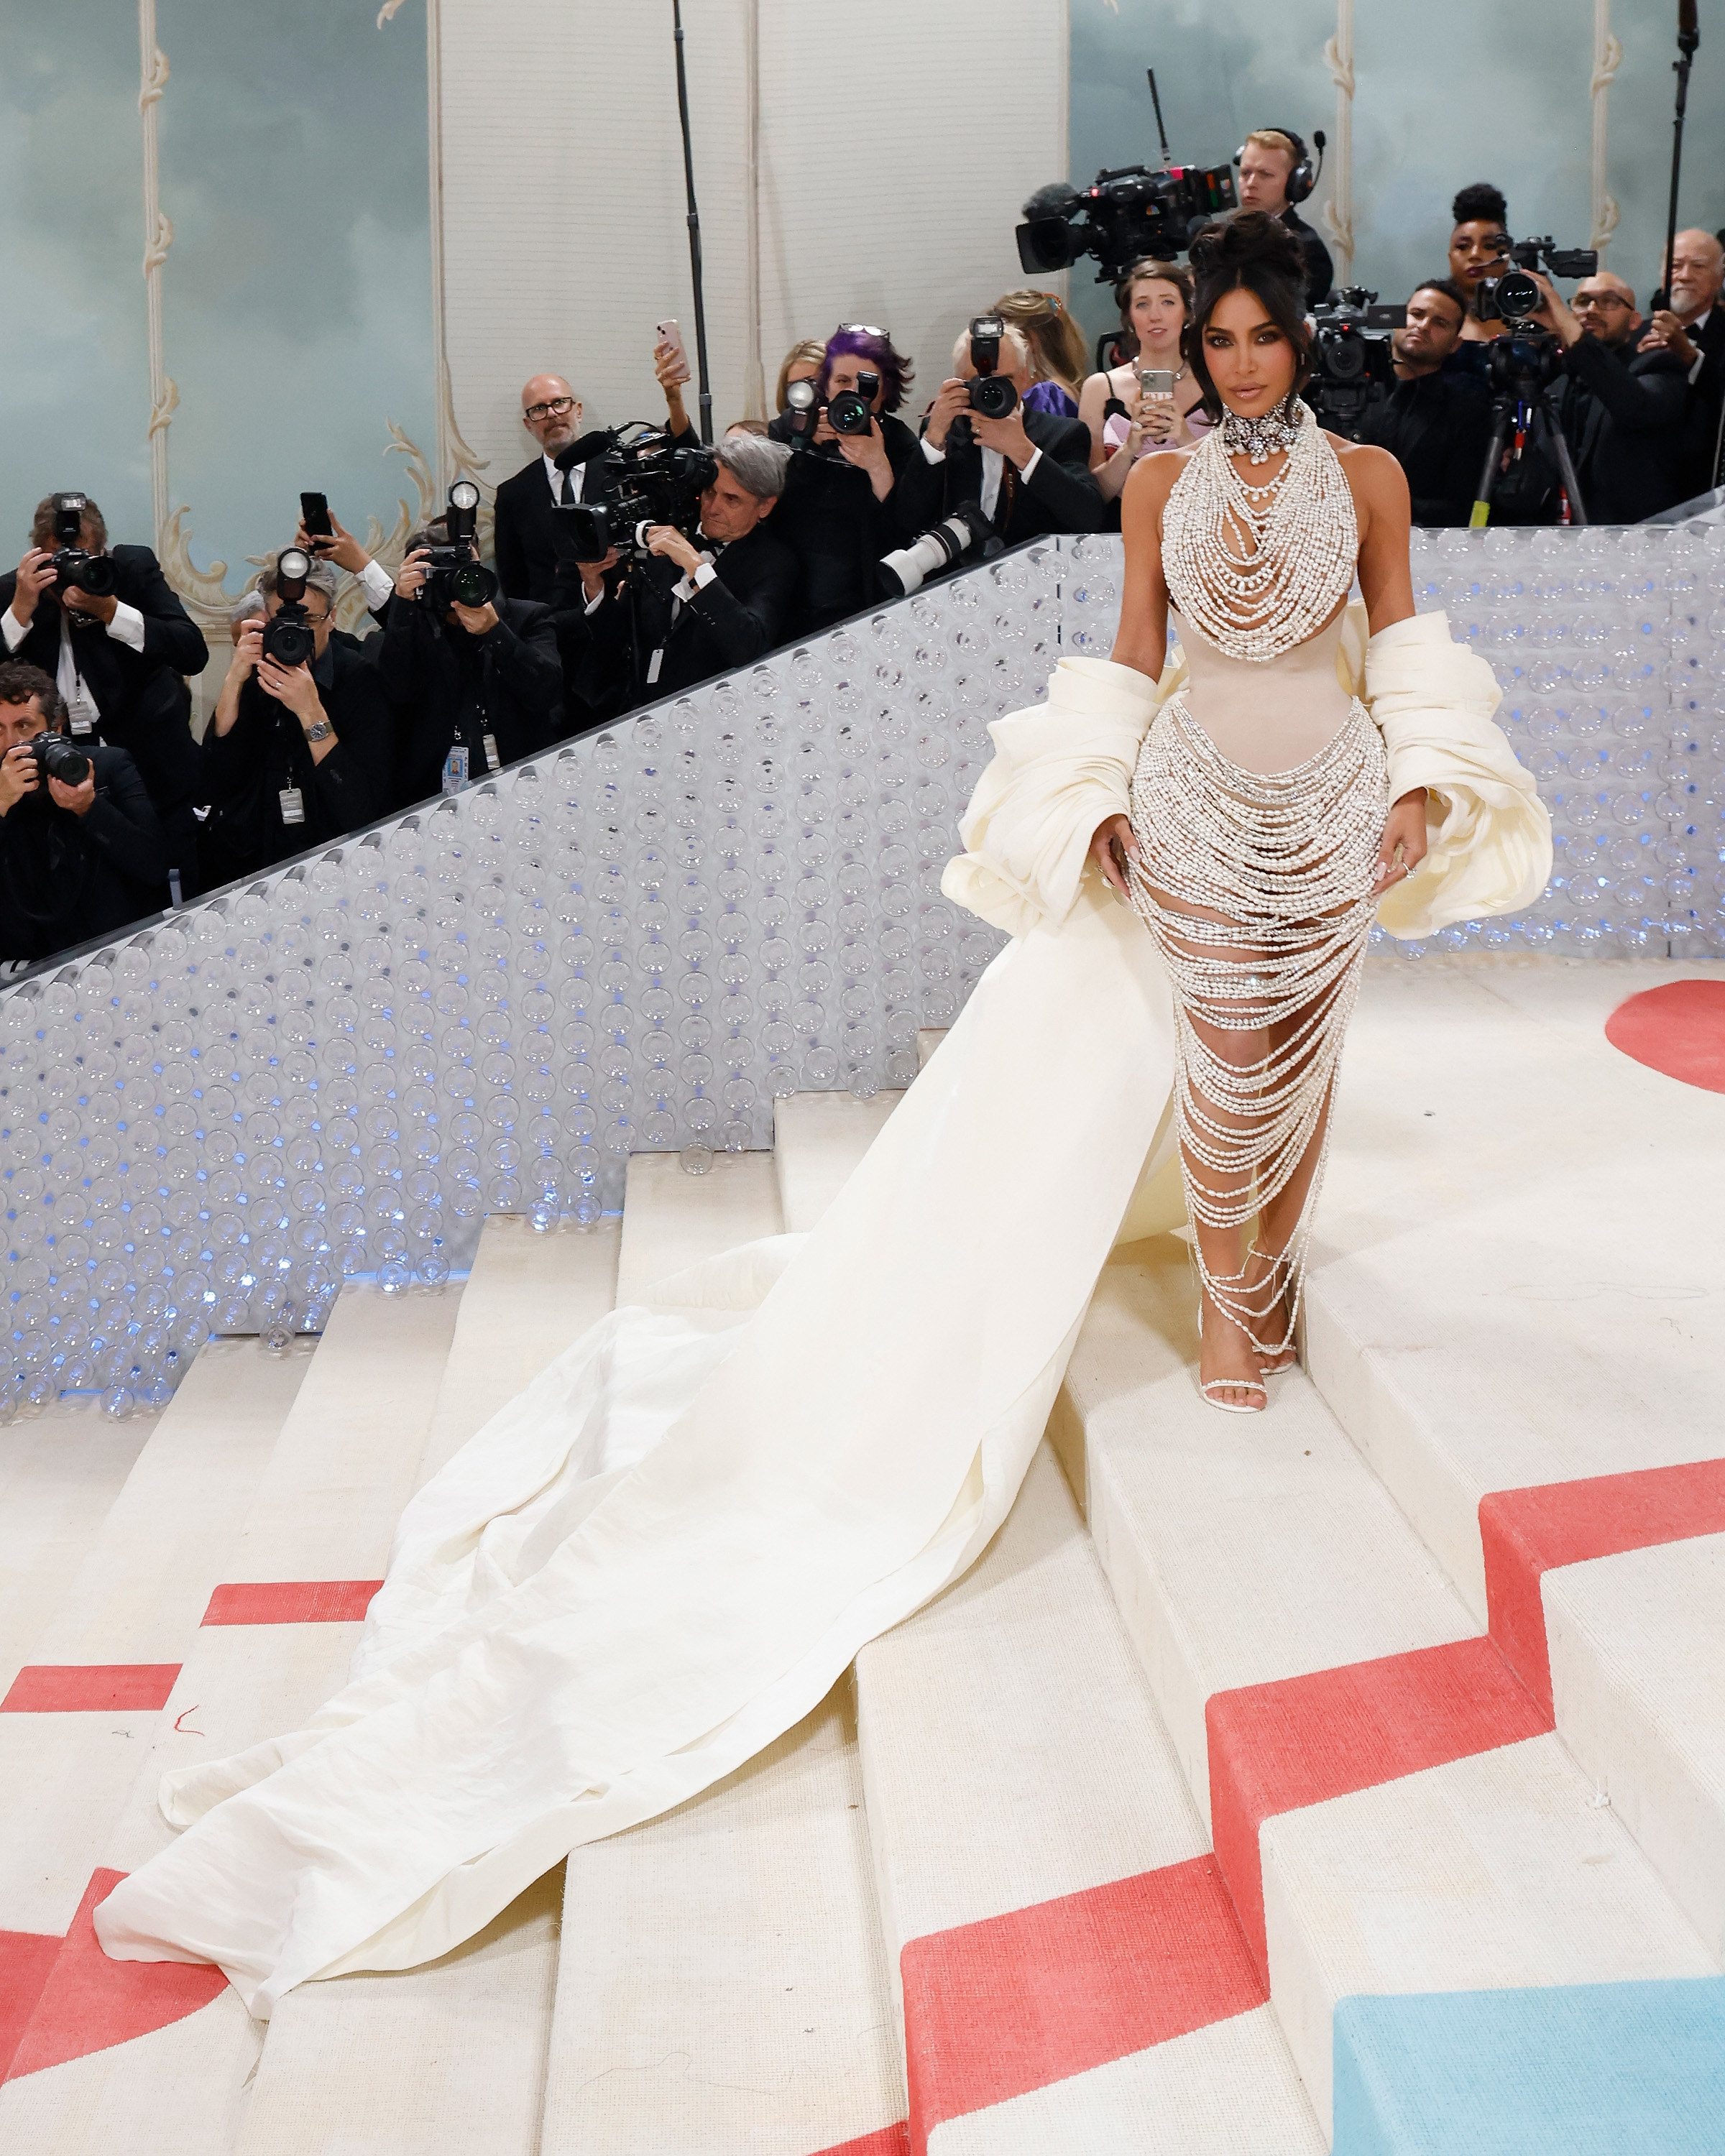 Will Kim Kardashian attend Met Gala 2023 despite initial invite questions  Find out